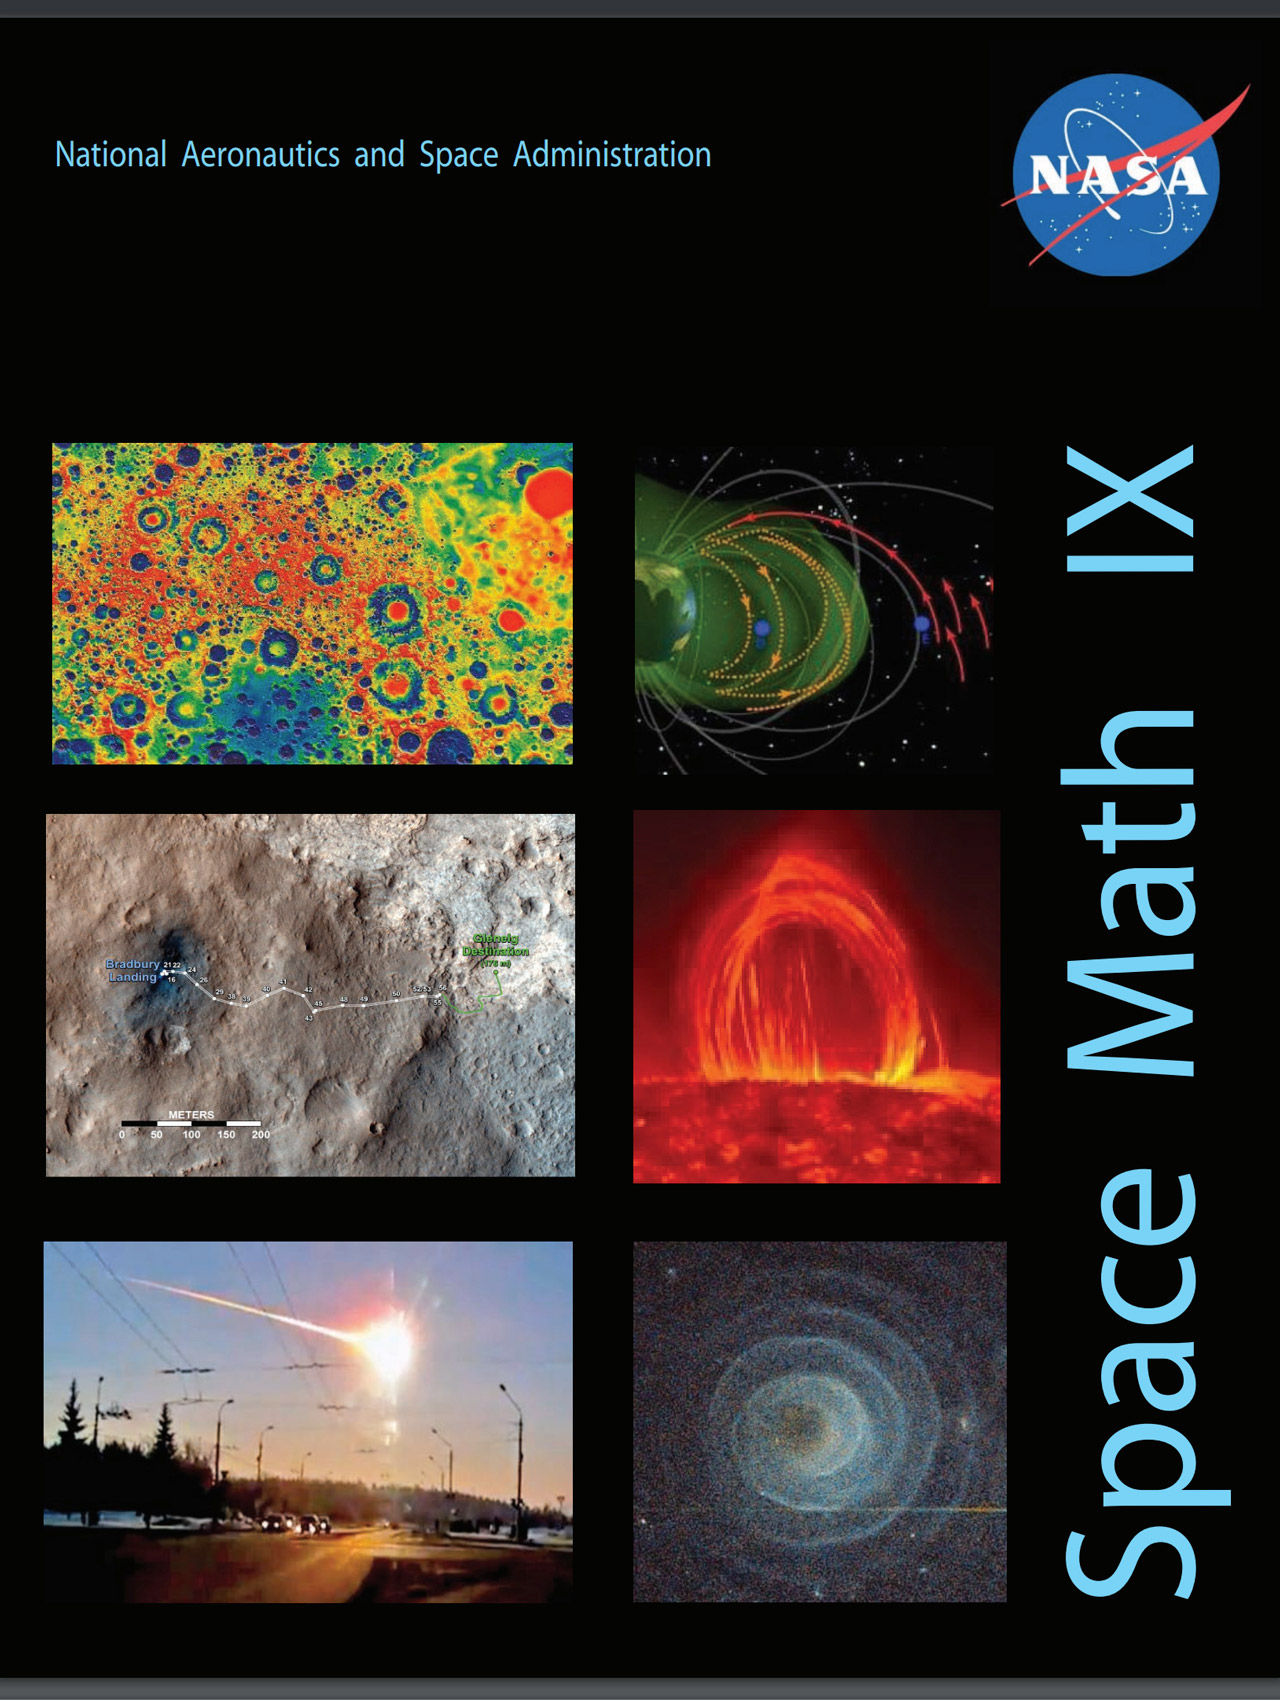 Cover of the resource with the title, "Space Math IX" written in blue text, vertically on the right. Six space-related images are included on the cover.